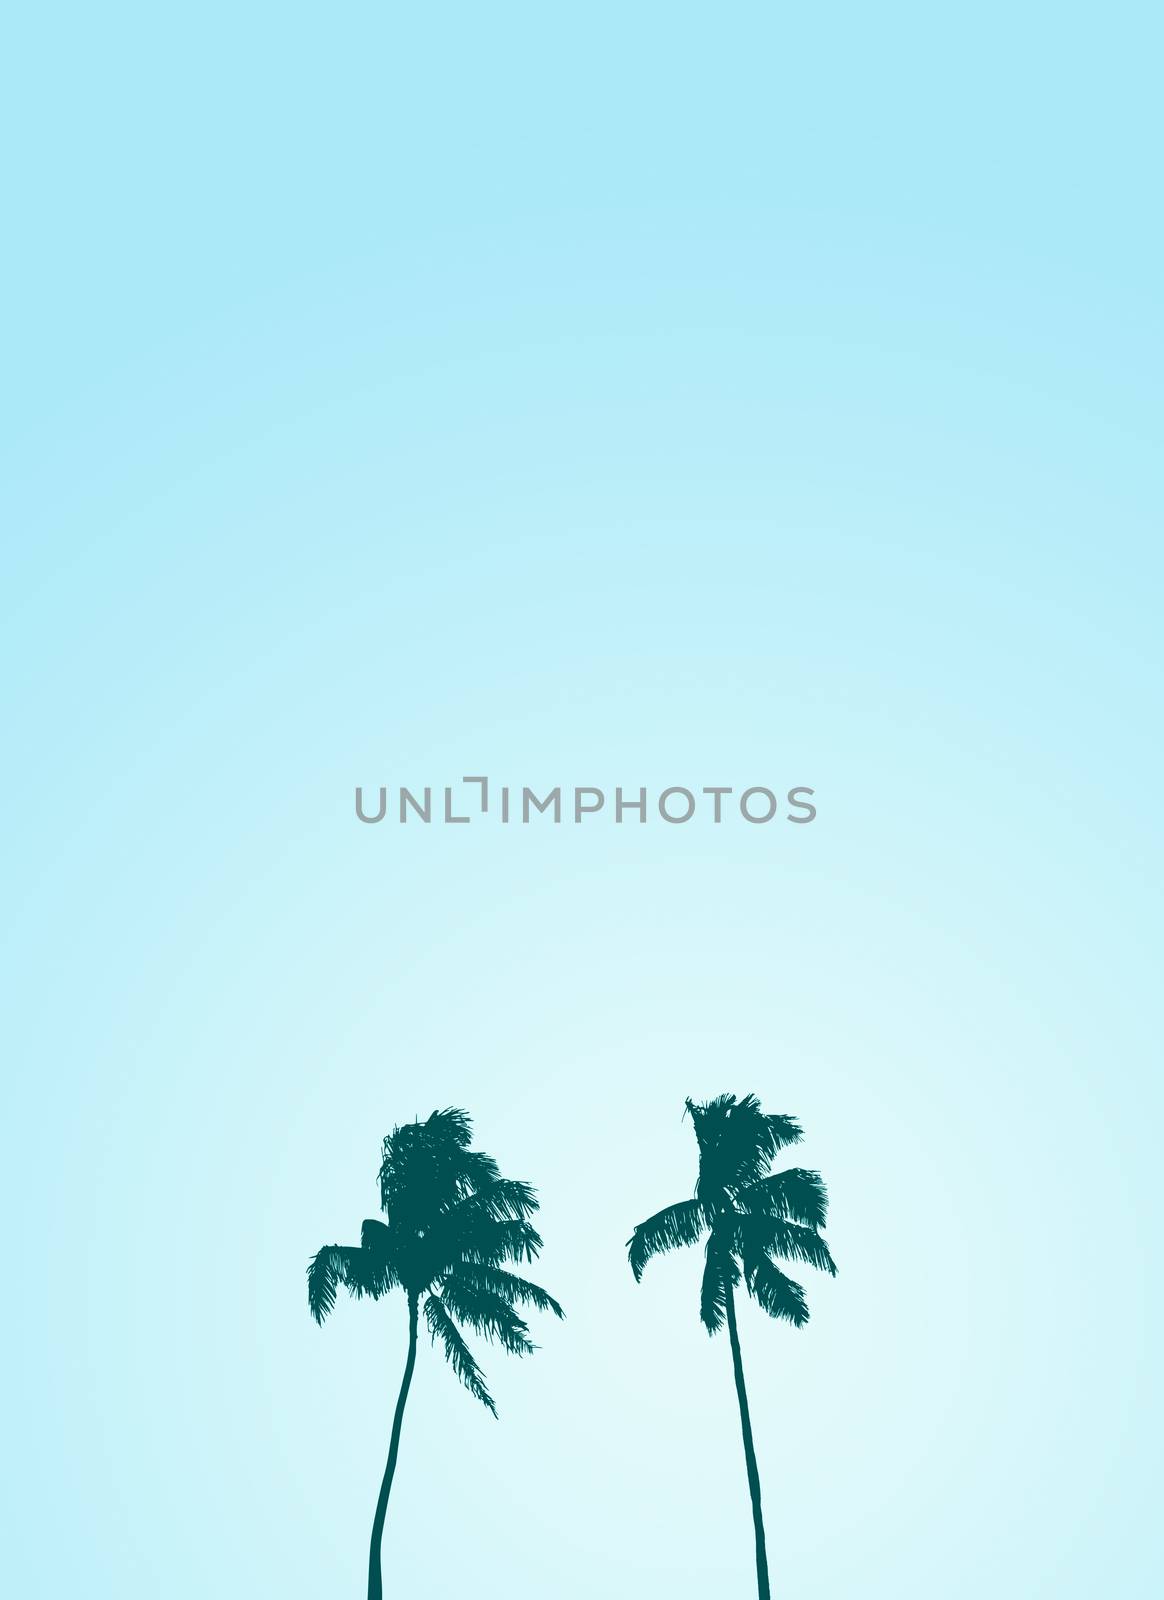 Retro Style Design Of Two Isolated Palm Trees Silhouettes Against A Pale Blue Sky With Copy Space